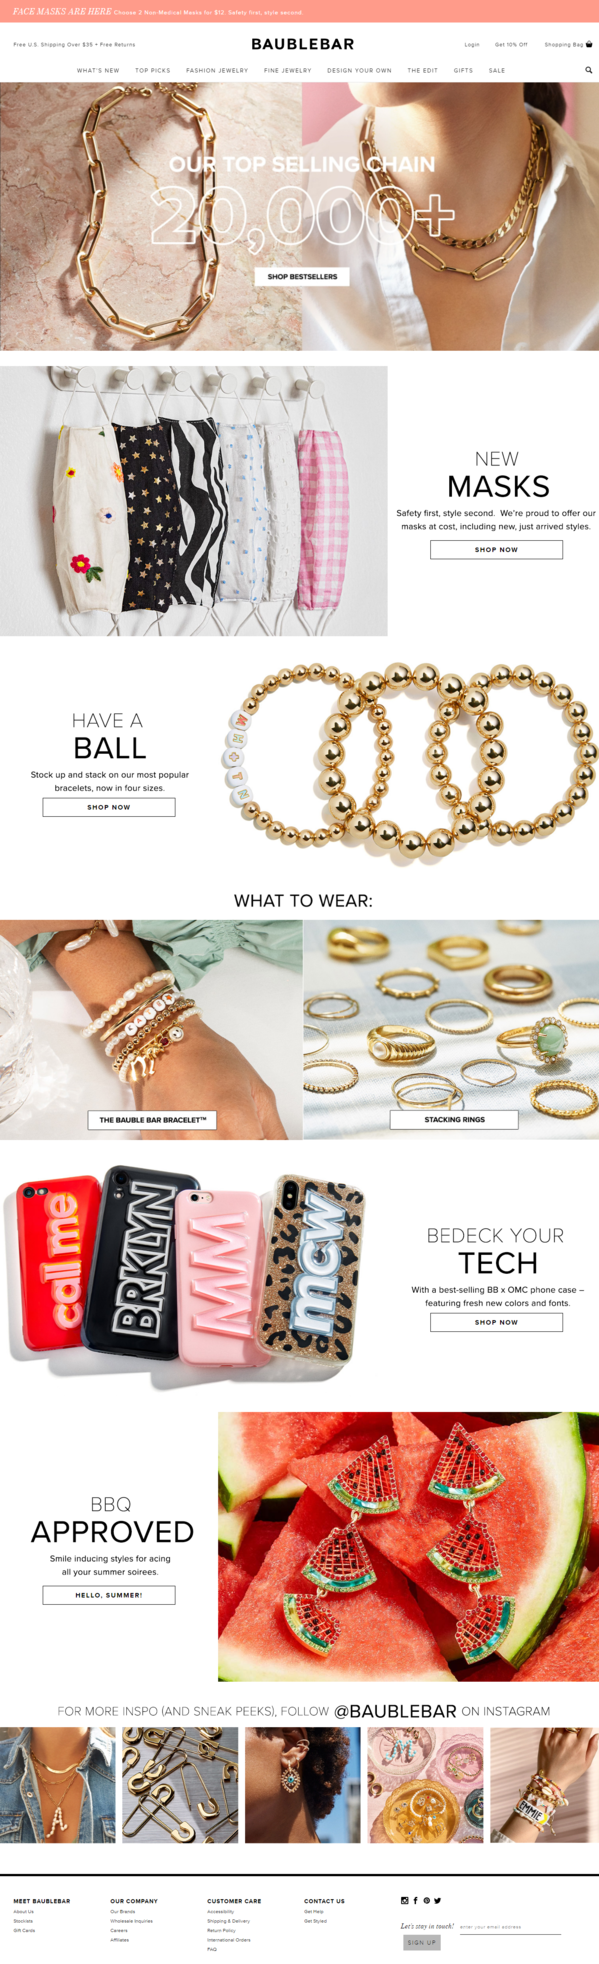 Accessories That Make The Outfit   BaubleBar.png